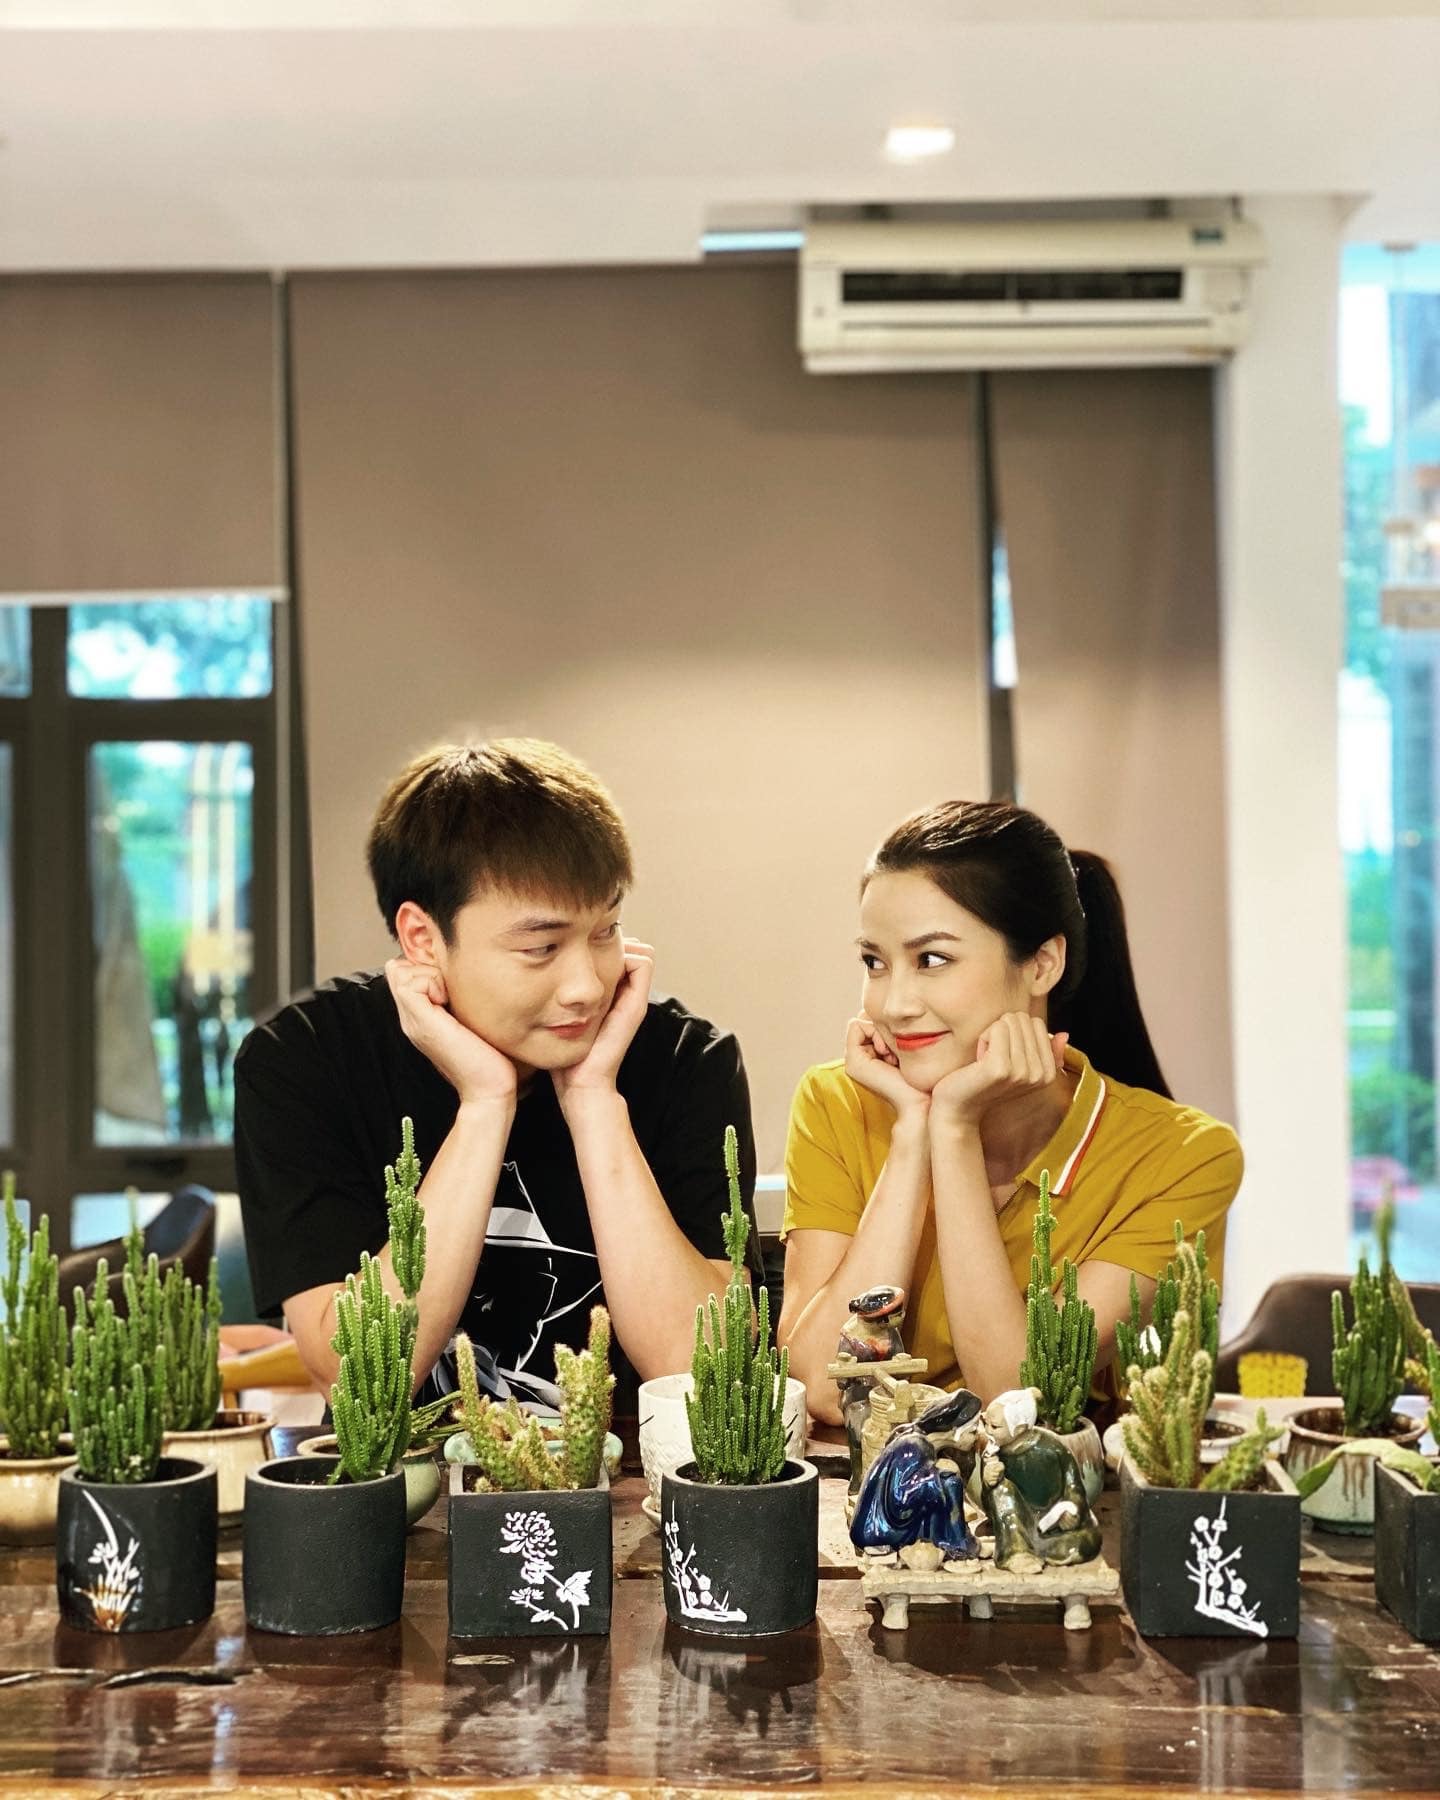 Trong Lan takes the lead role The way to the flower land after making a mistake, revealing his true feelings for his co-star Anh Dao